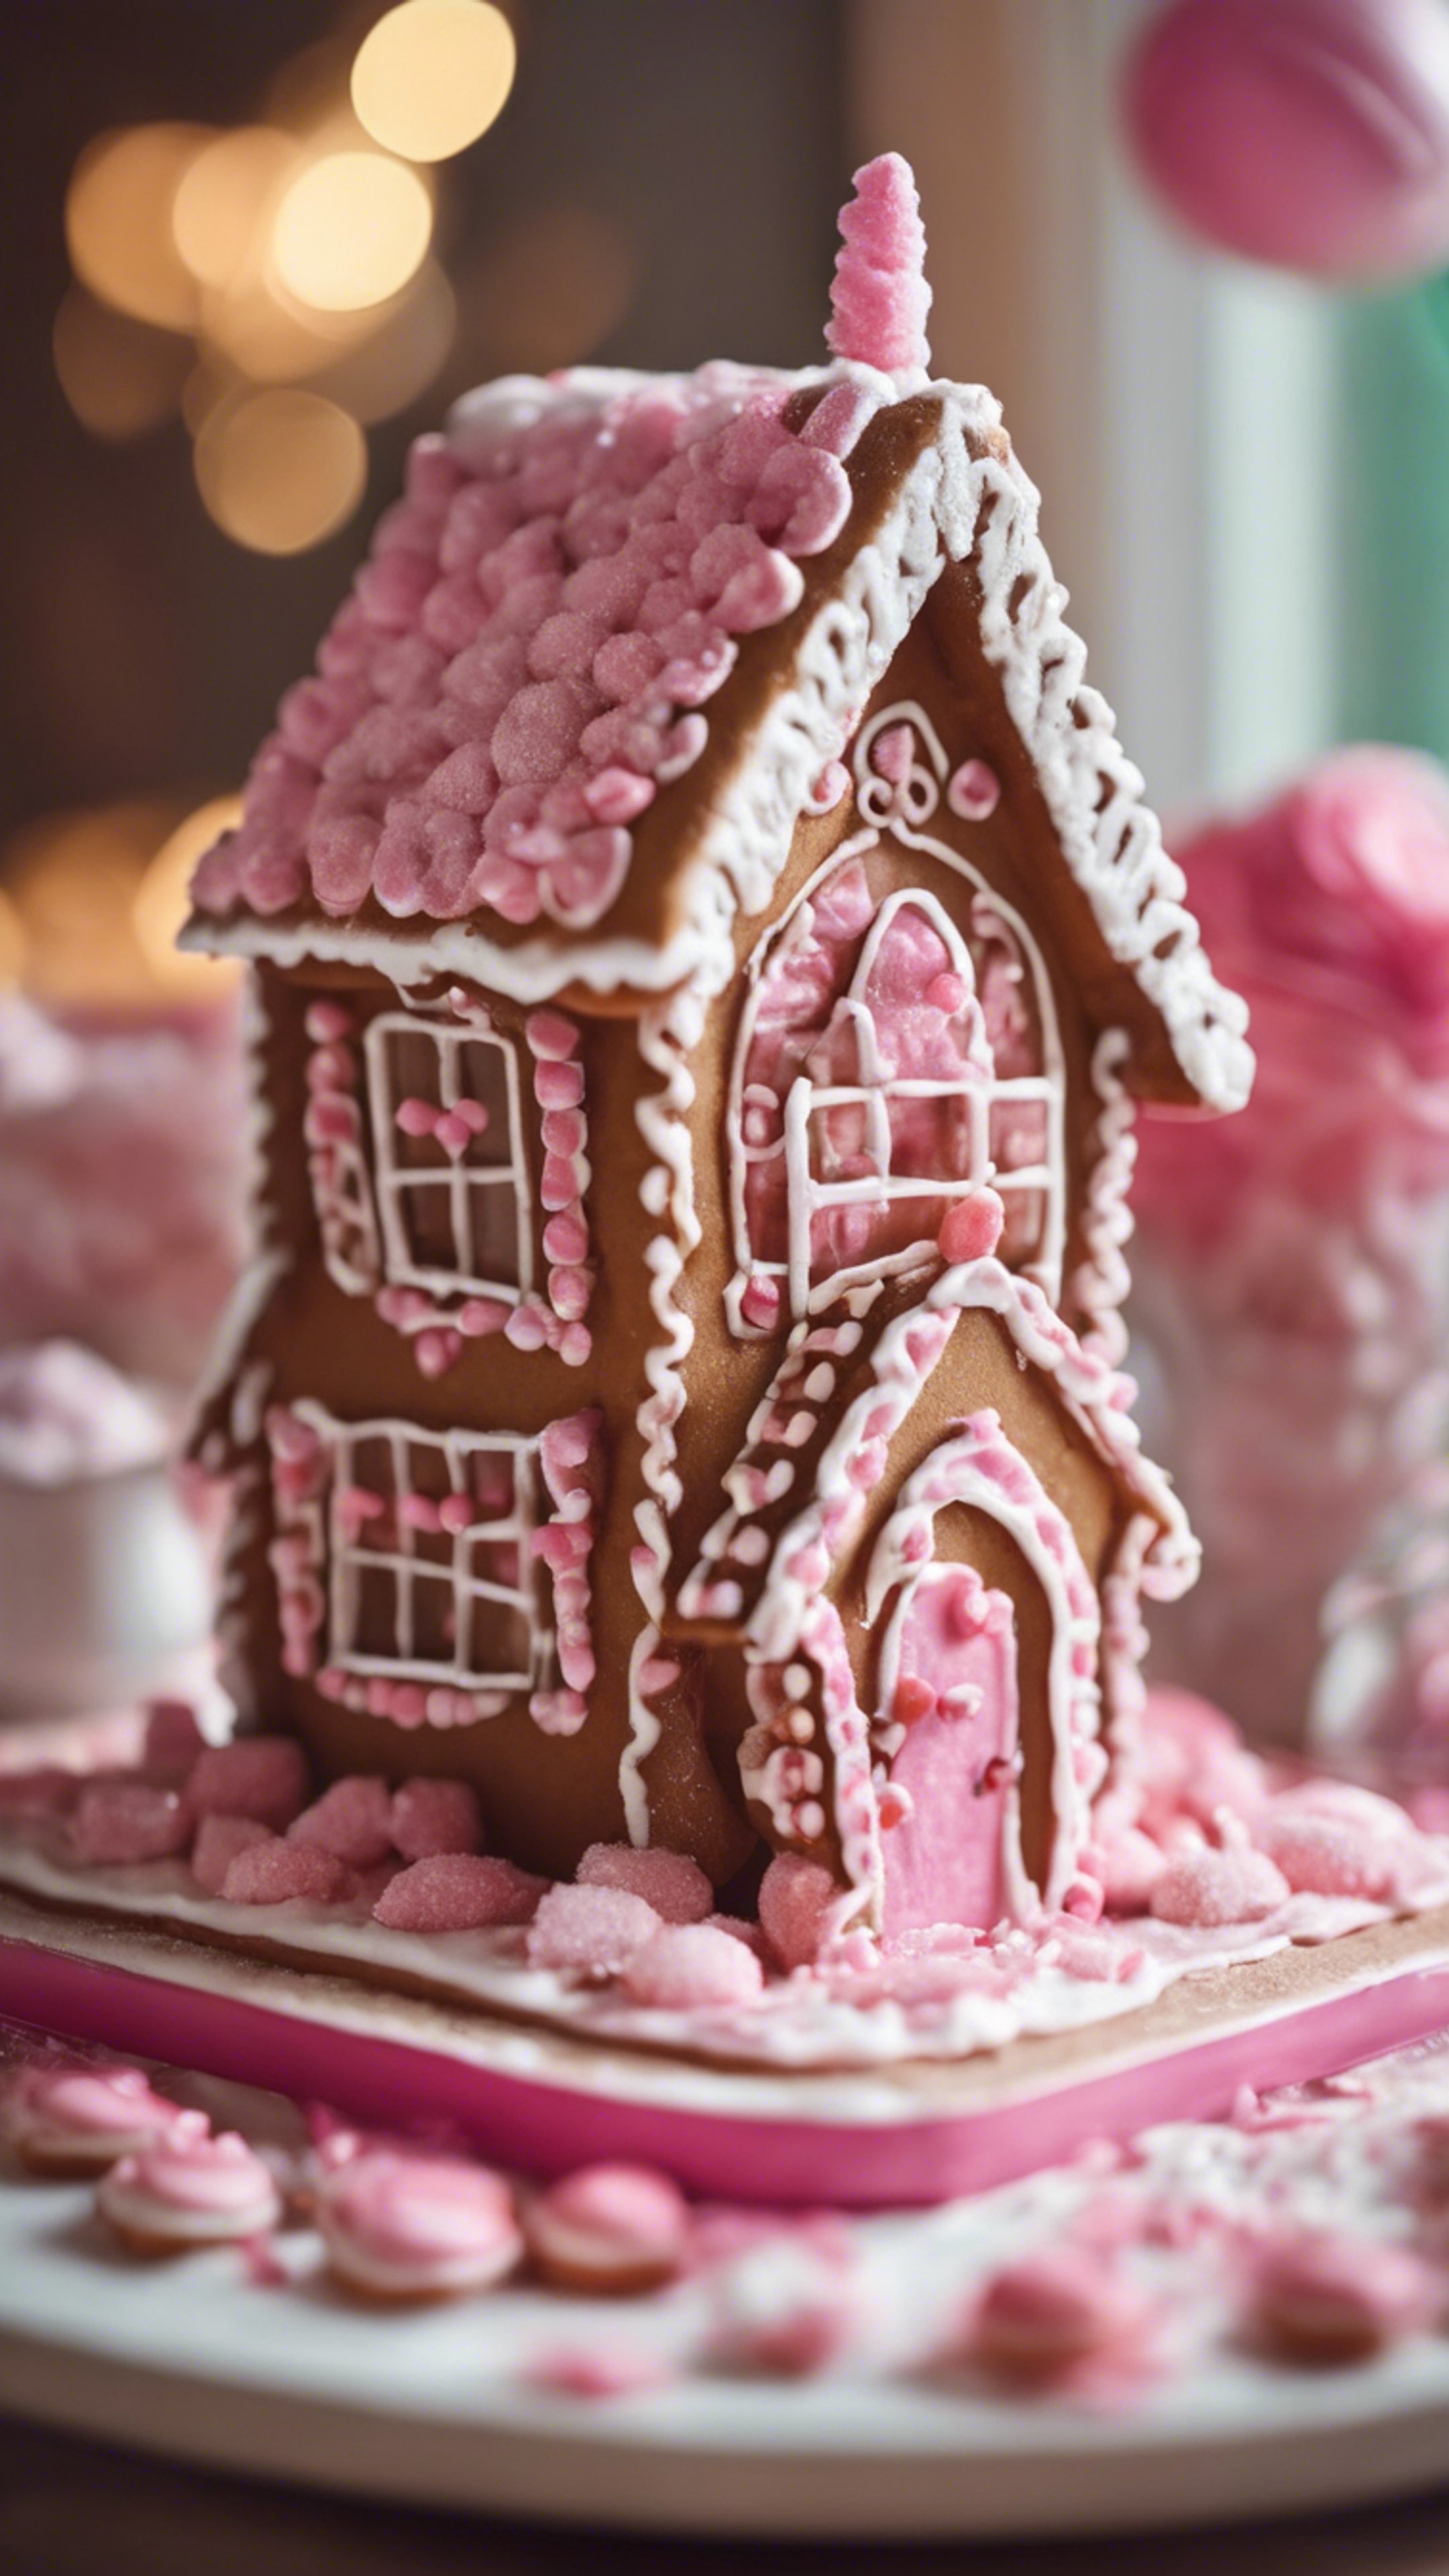 A cute gingerbread house adorned with pink icing and candy. Tapetai[80166f7992434f38b590]